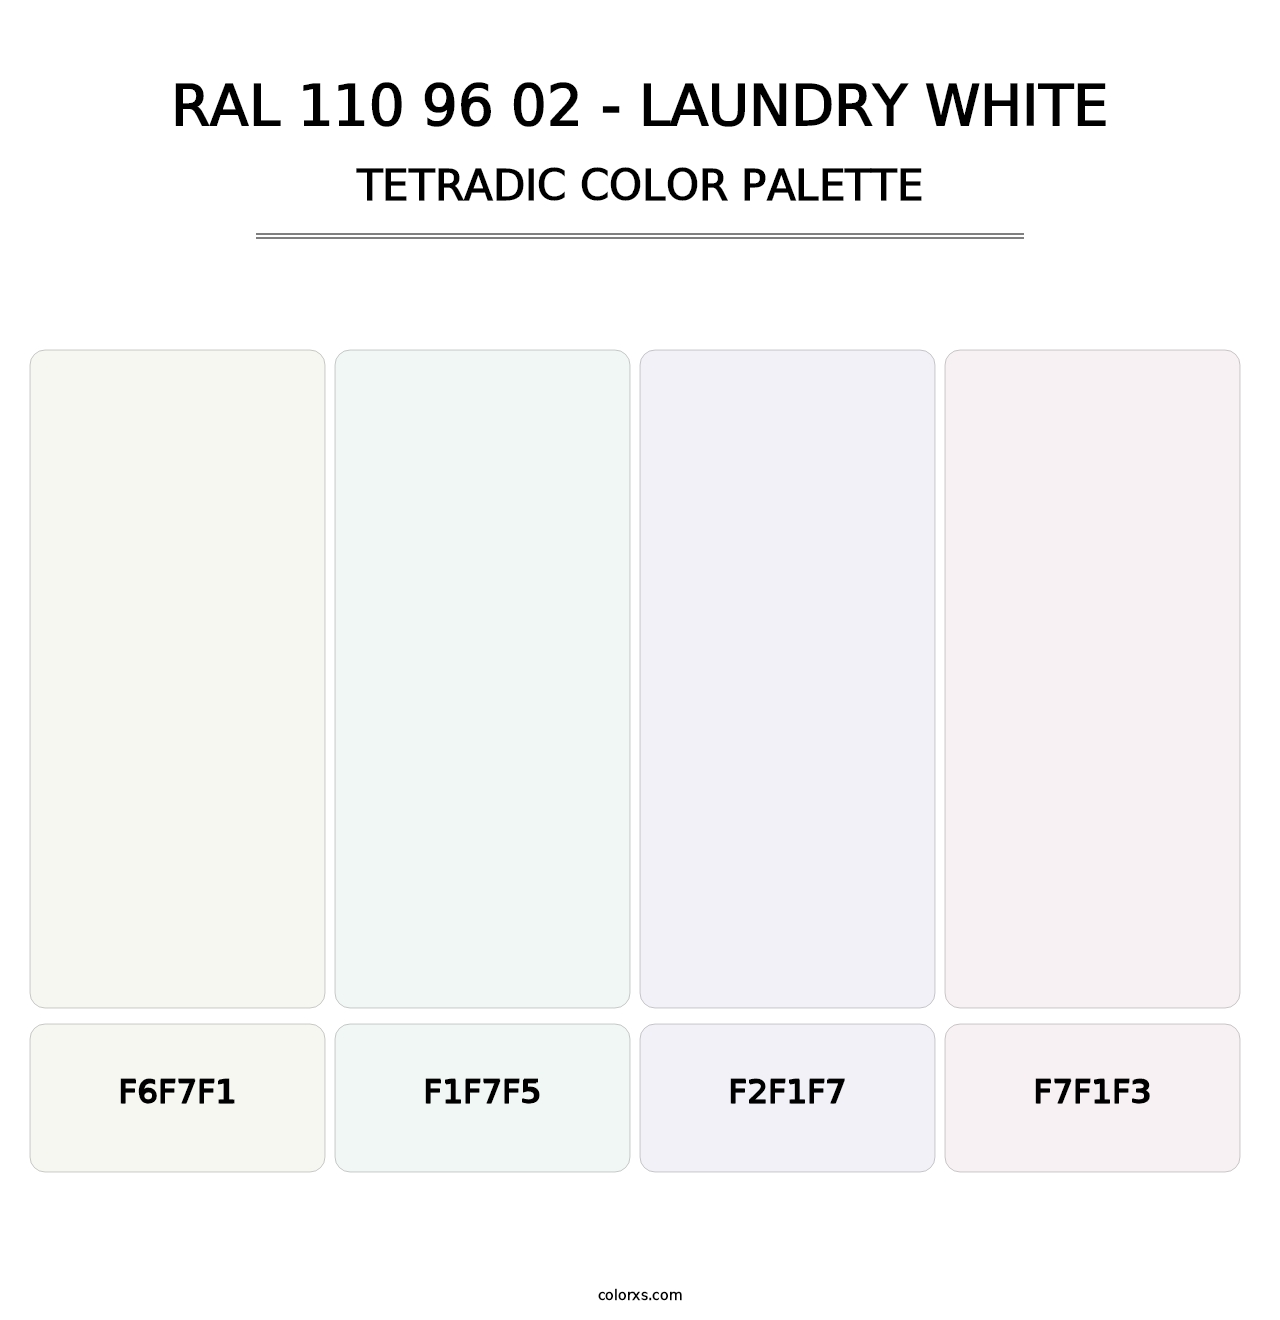 RAL 110 96 02 - Laundry White - Tetradic Color Palette